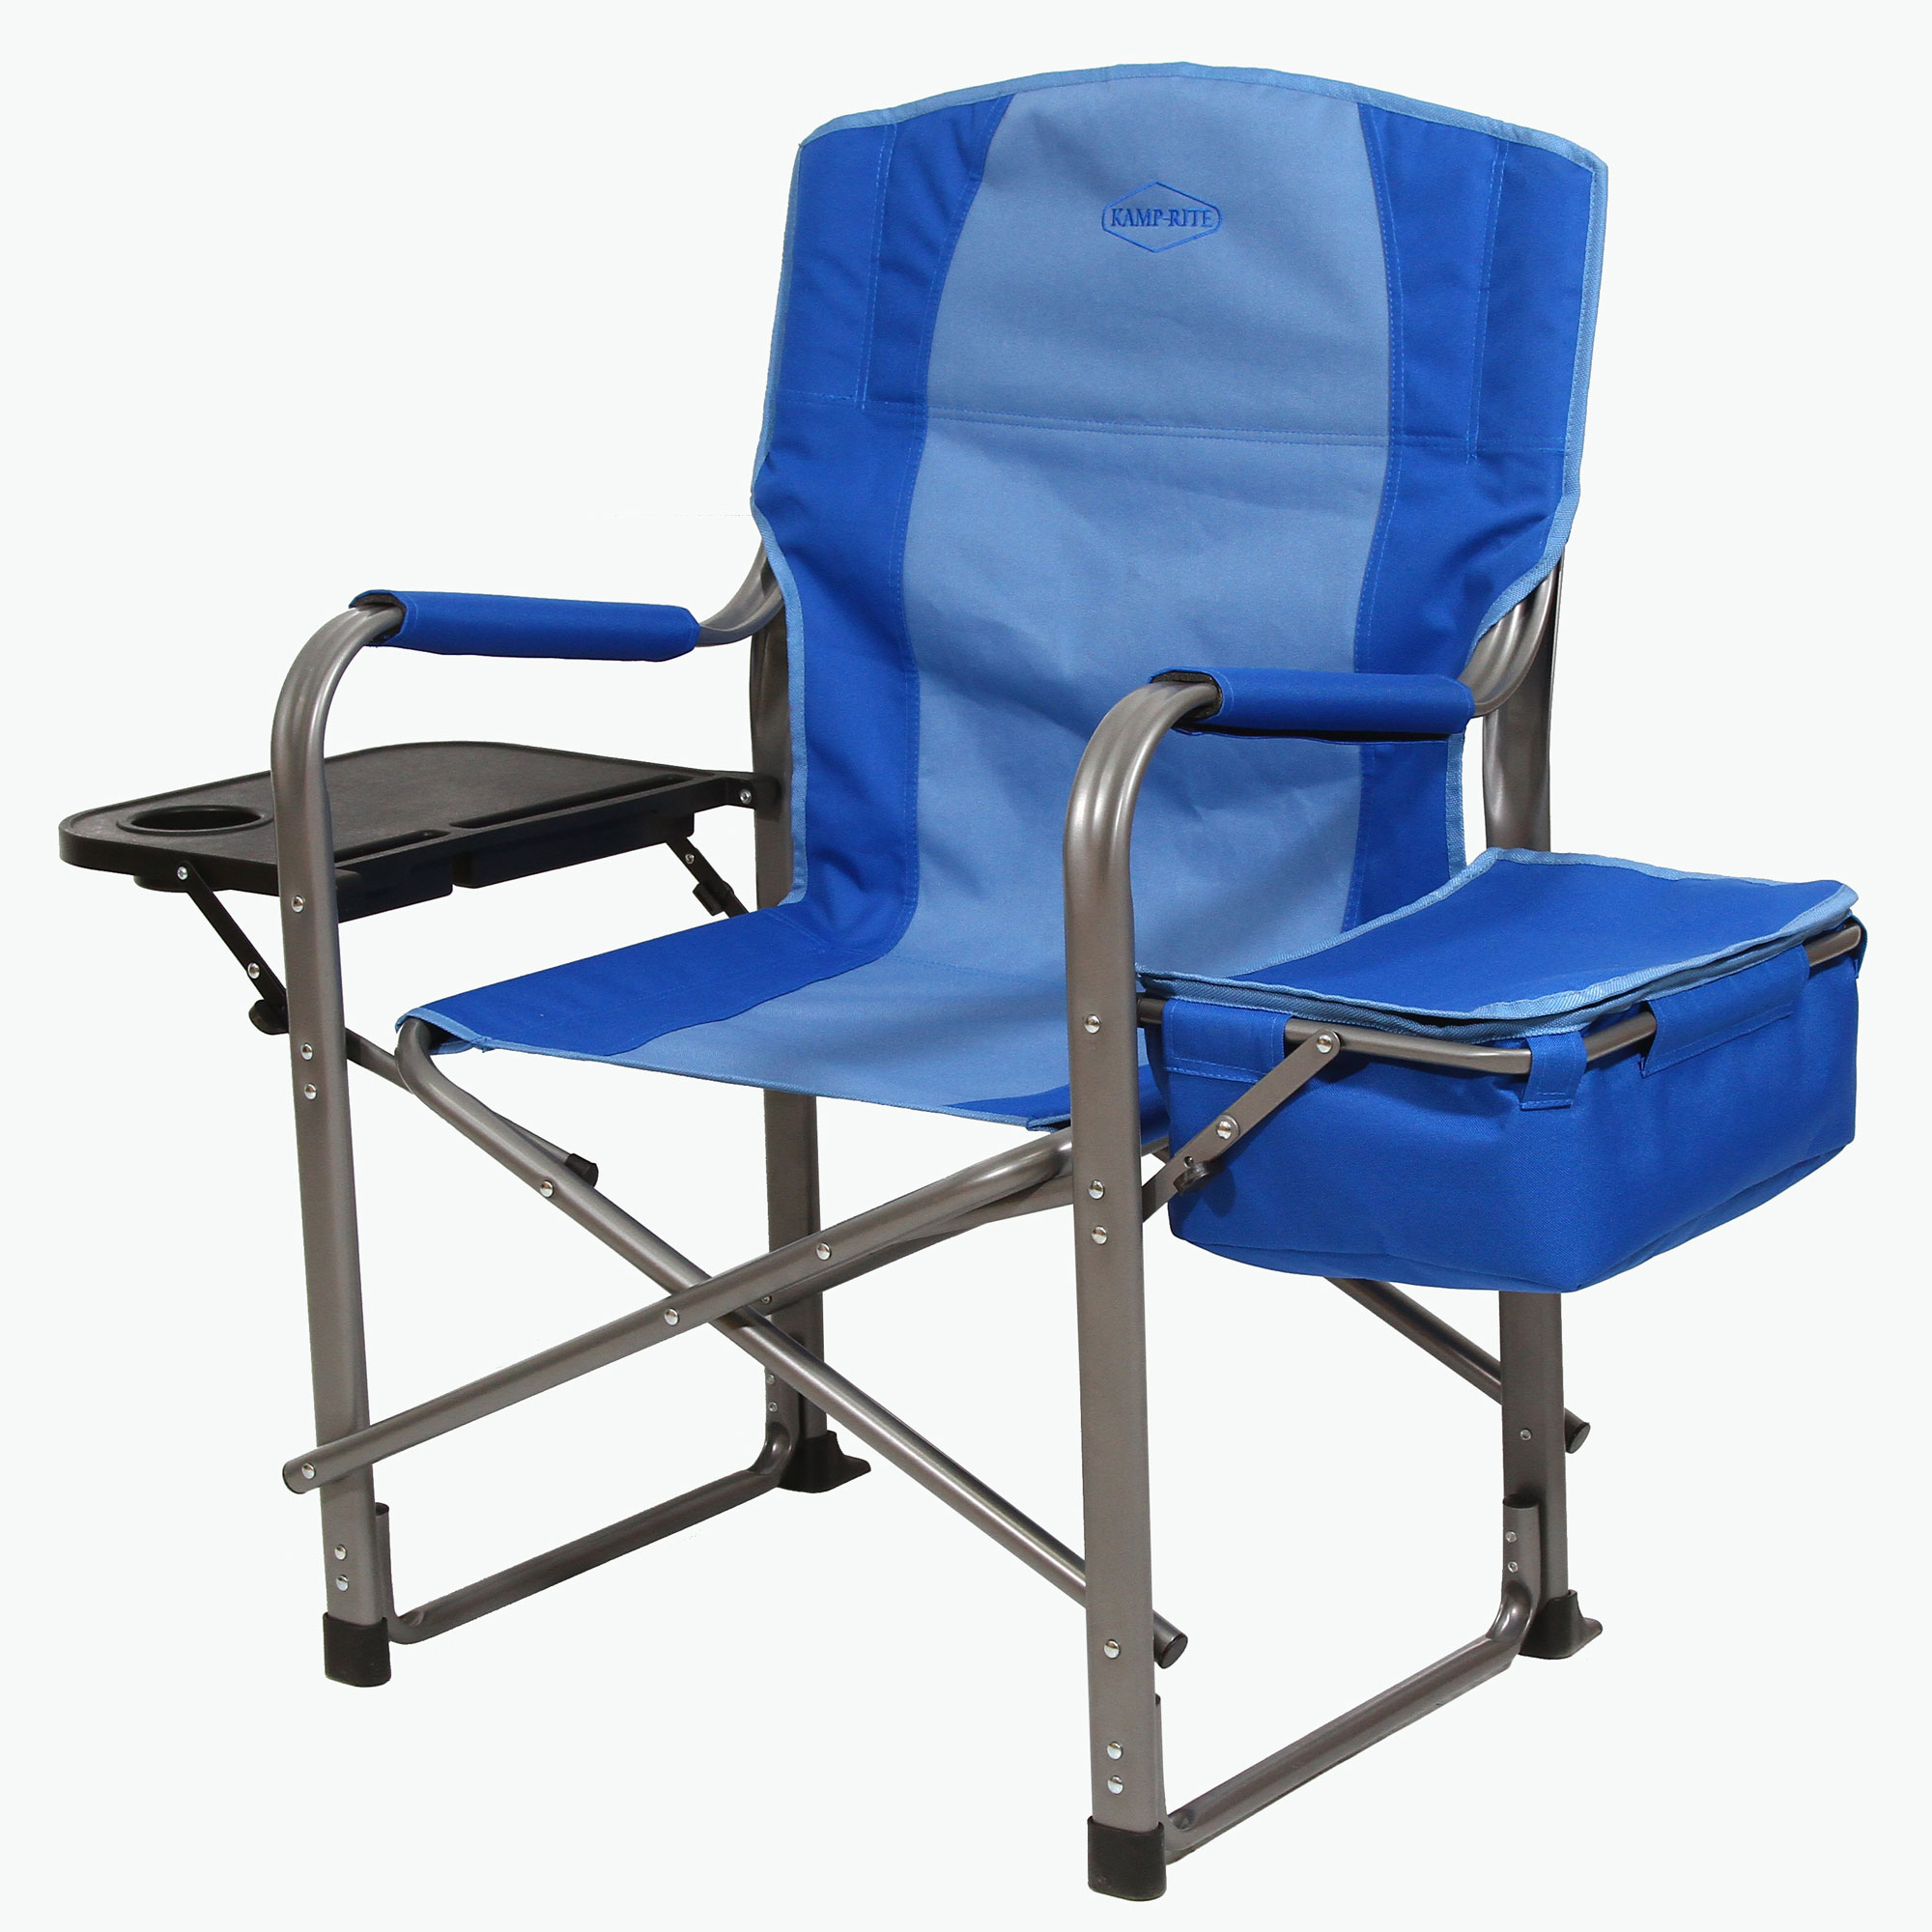 Kamp-Rite Director Portable Lounge Chair w/ Cooler & Side Table, (2 Pack) - image 3 of 10